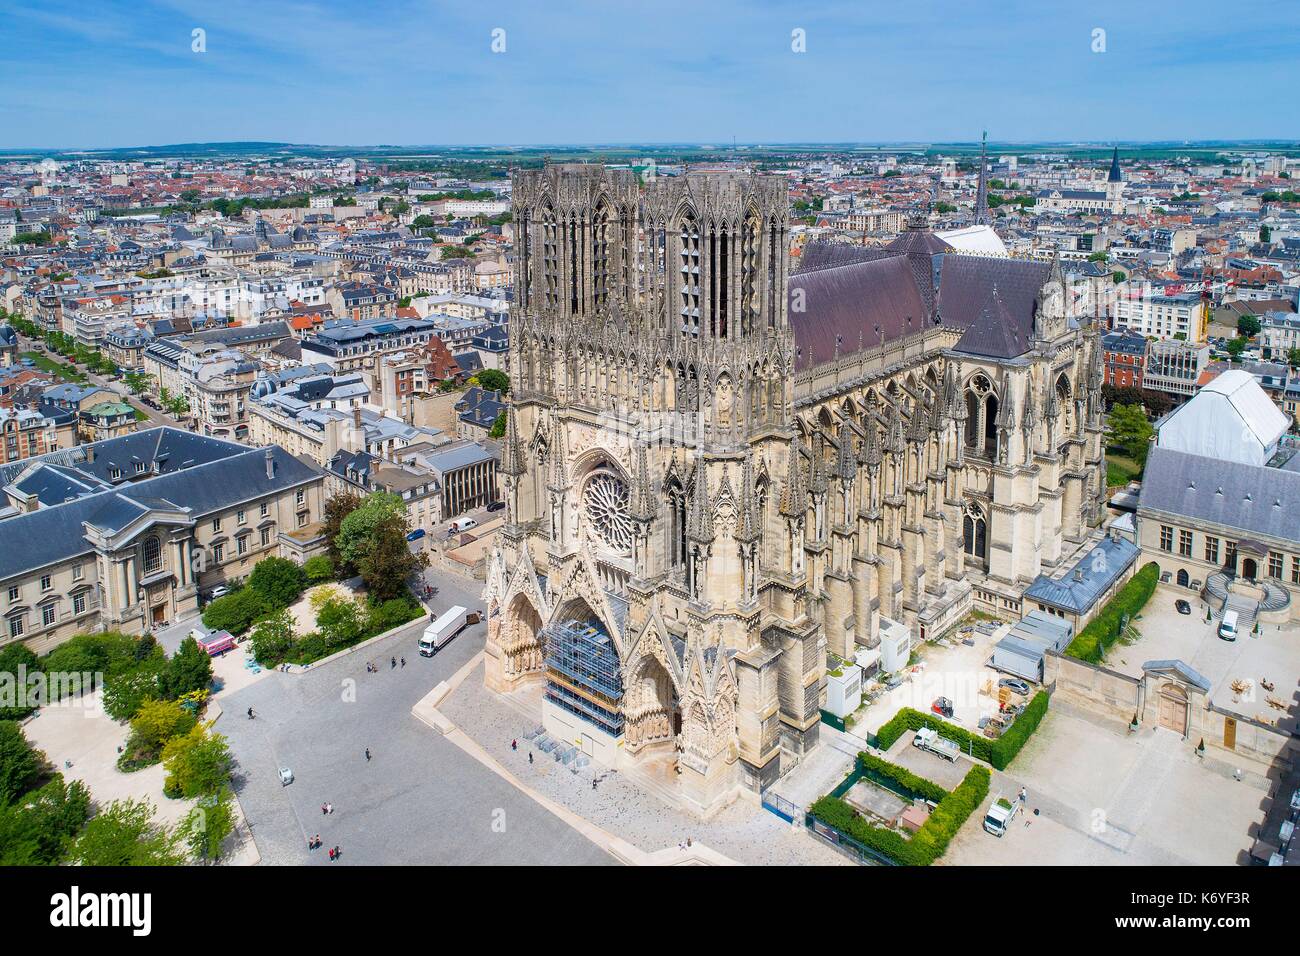 France, Marne, Reims, Notre Dame de Reims cathedral, listed as World Heritage by UNESCO Stock Photo